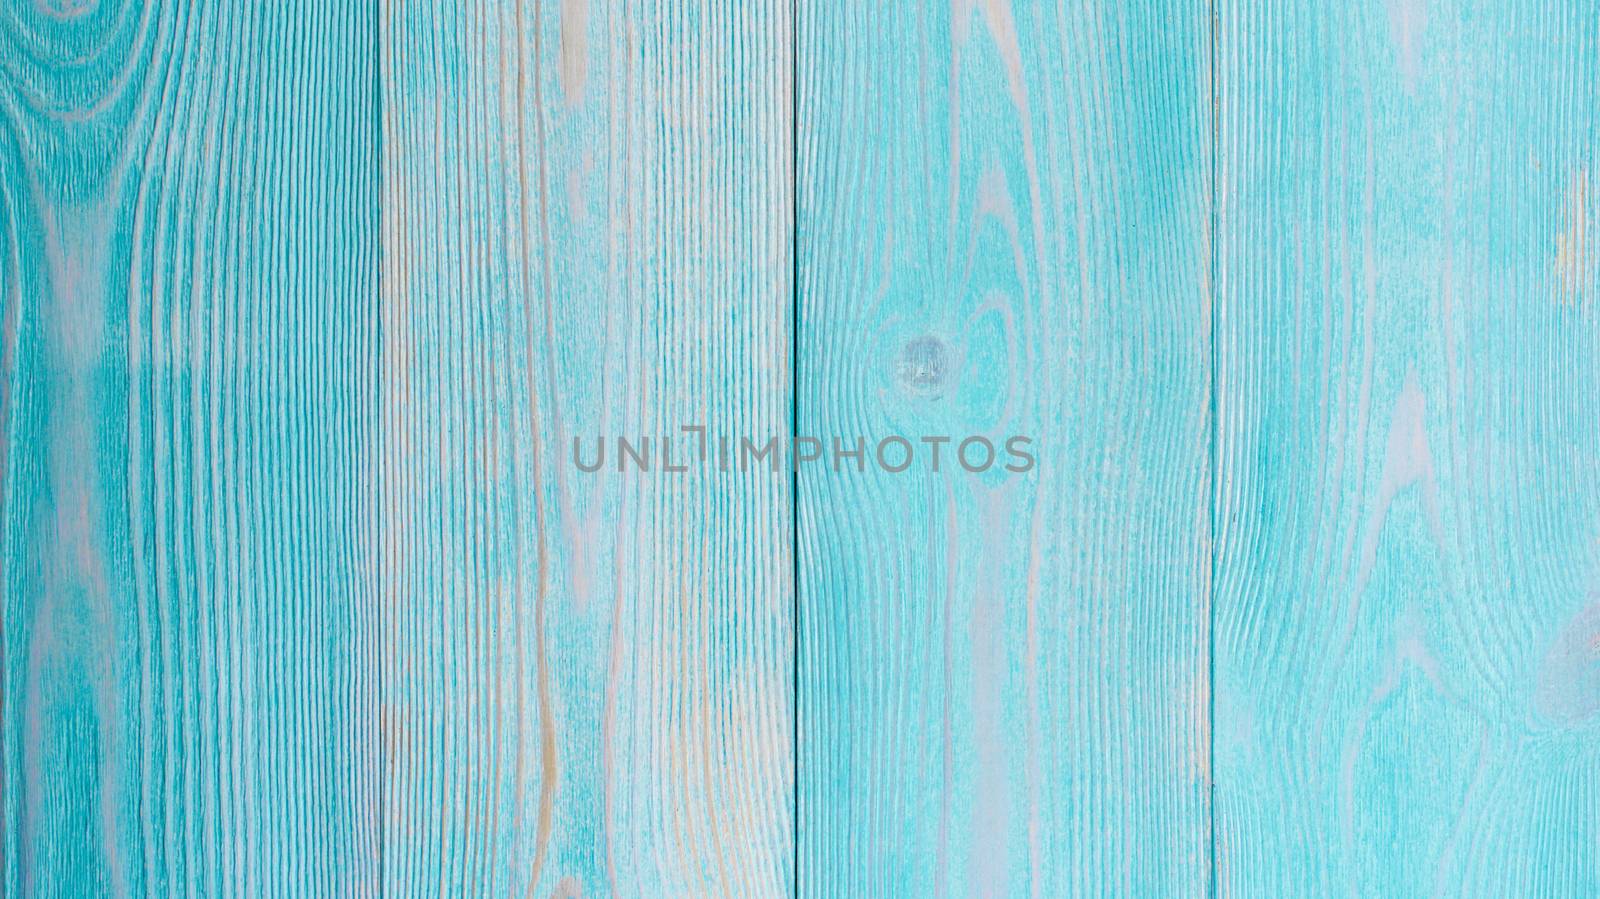 Stain Knot Turquoise and Beige Wooden Background closeup